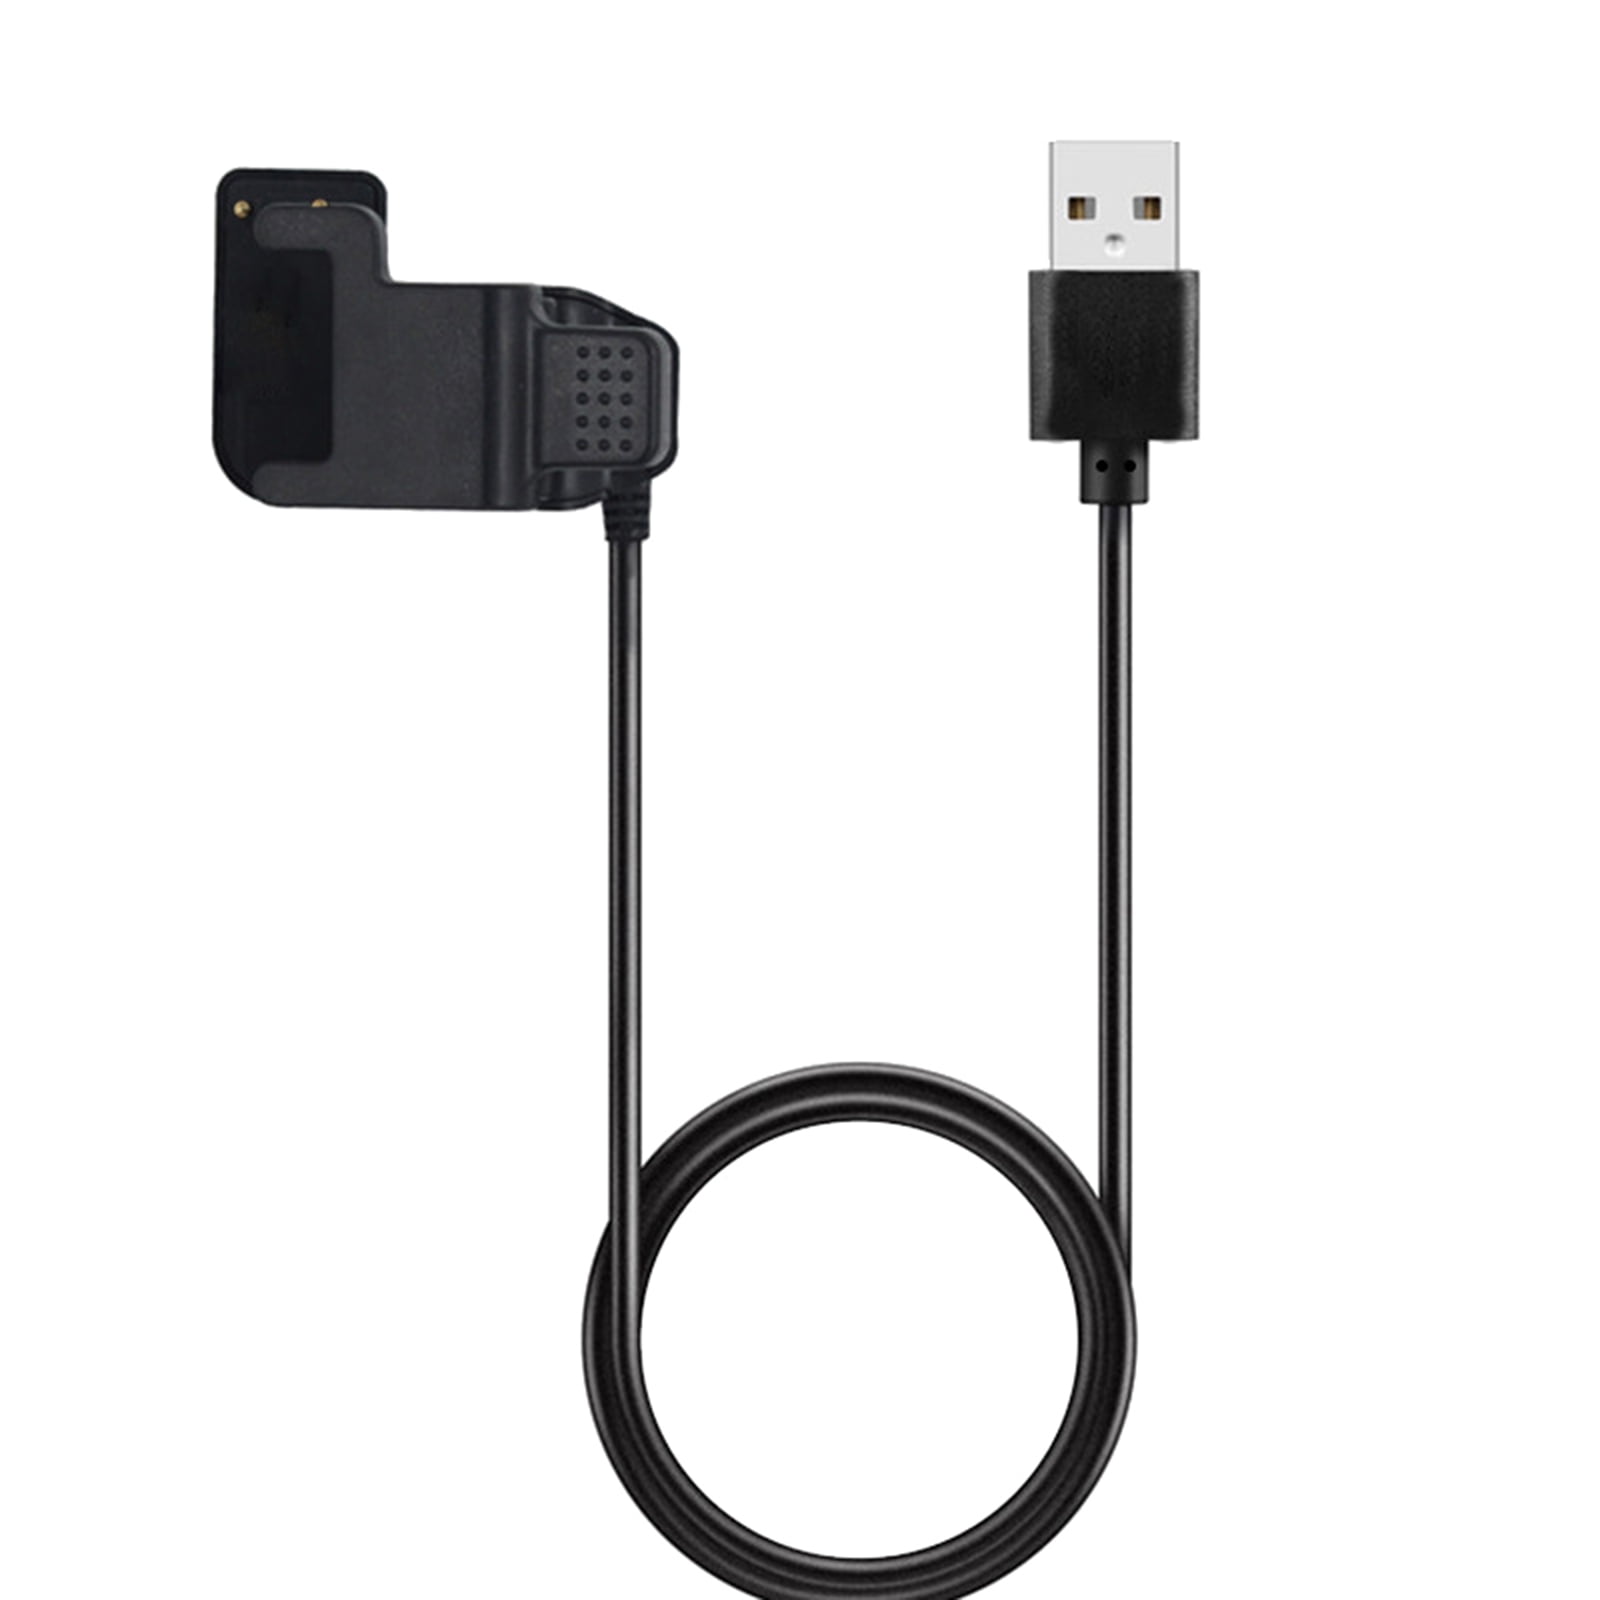 Wahoo Tickr Fit Replacement USB Charging Clip